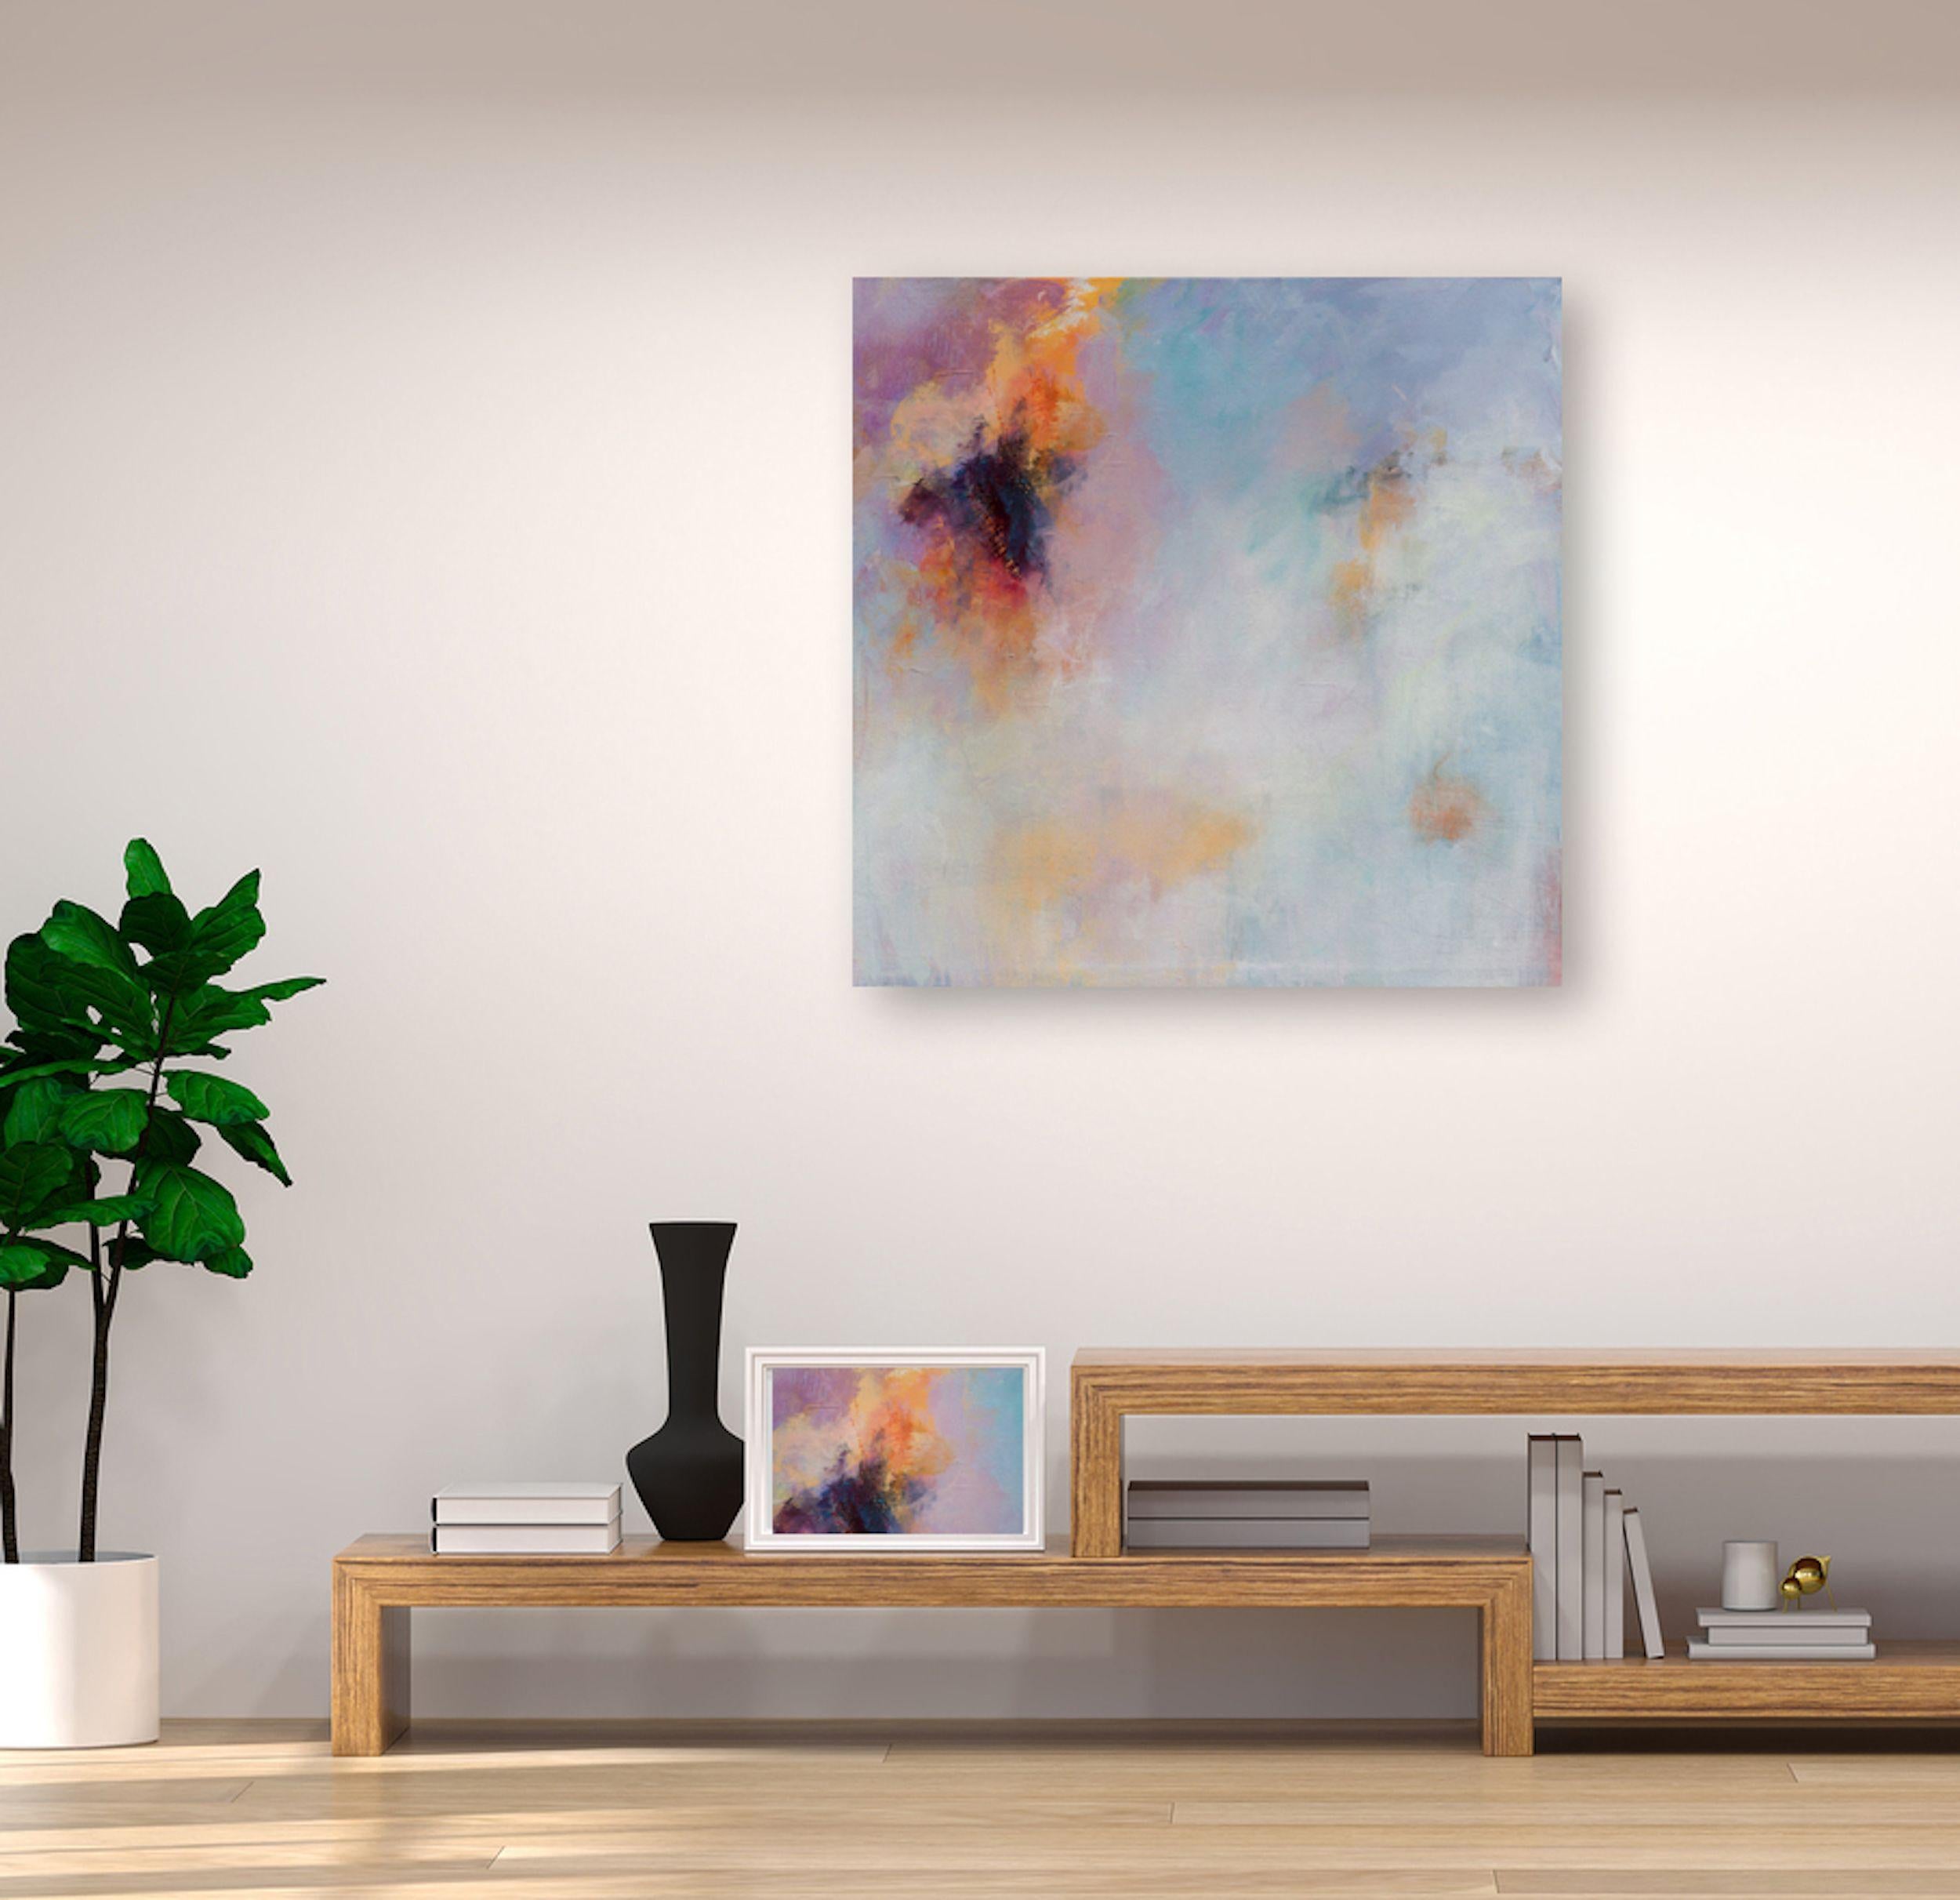 This is an original abstract painting on a gallery wrapped canvas.  It makes a strong statement whether in a home or office.  There are 10+ layers of acrylic paint that give the piece nuance, depth, and interest.  The side edges are painted black